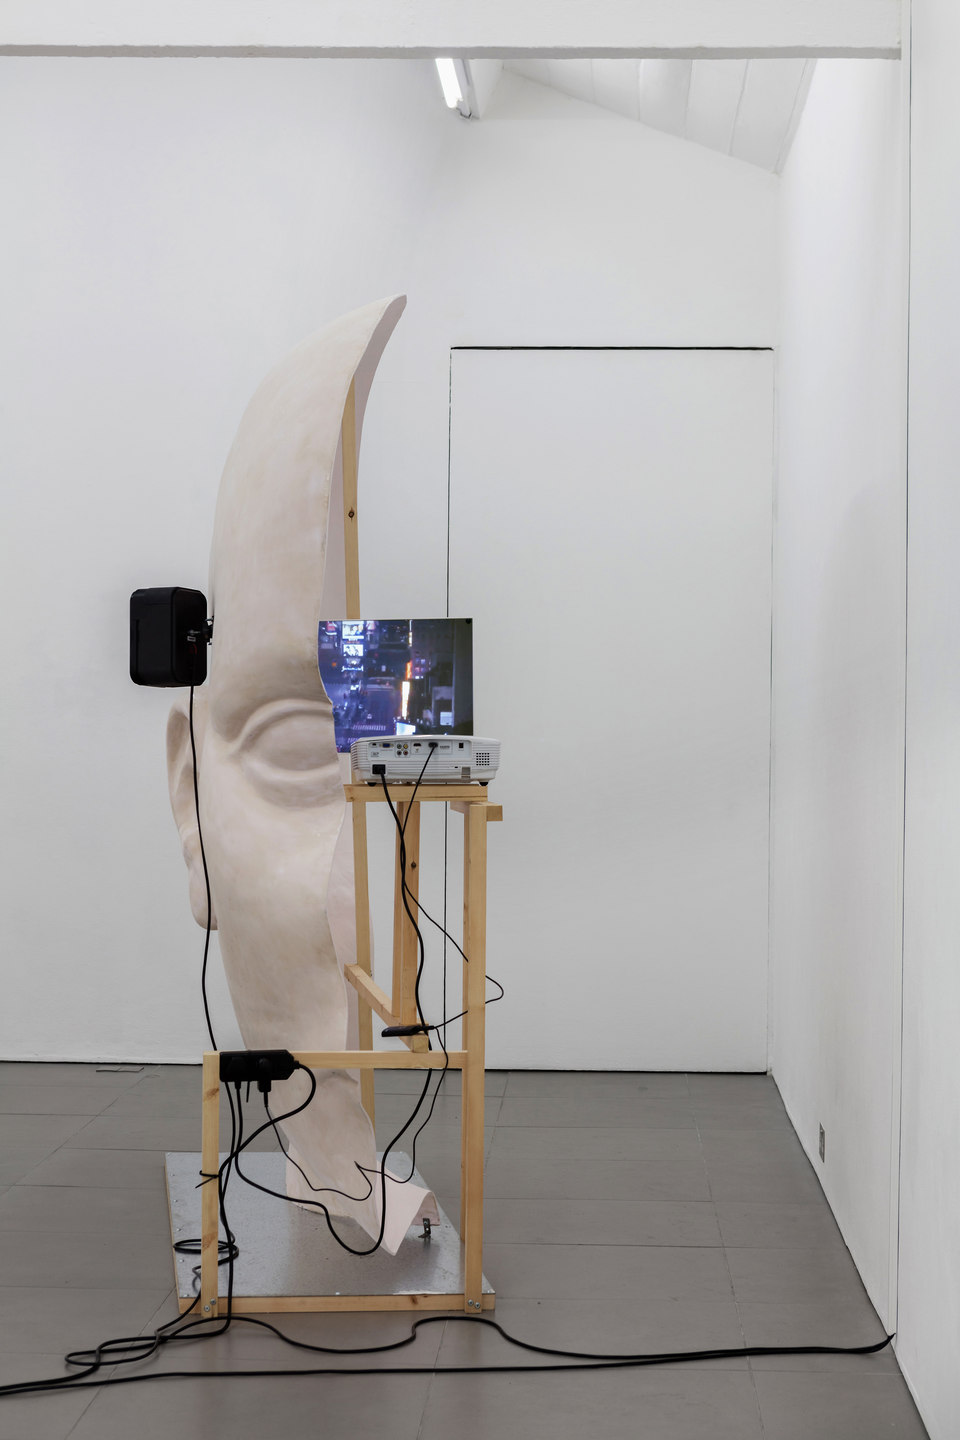 Anne de Vries, Submission, 2015, fibre glass resin, wood, perspex, metal, live stream webcams, four channel audio track: 16 mins 25 secs, dimensions variable. Cell Project Space